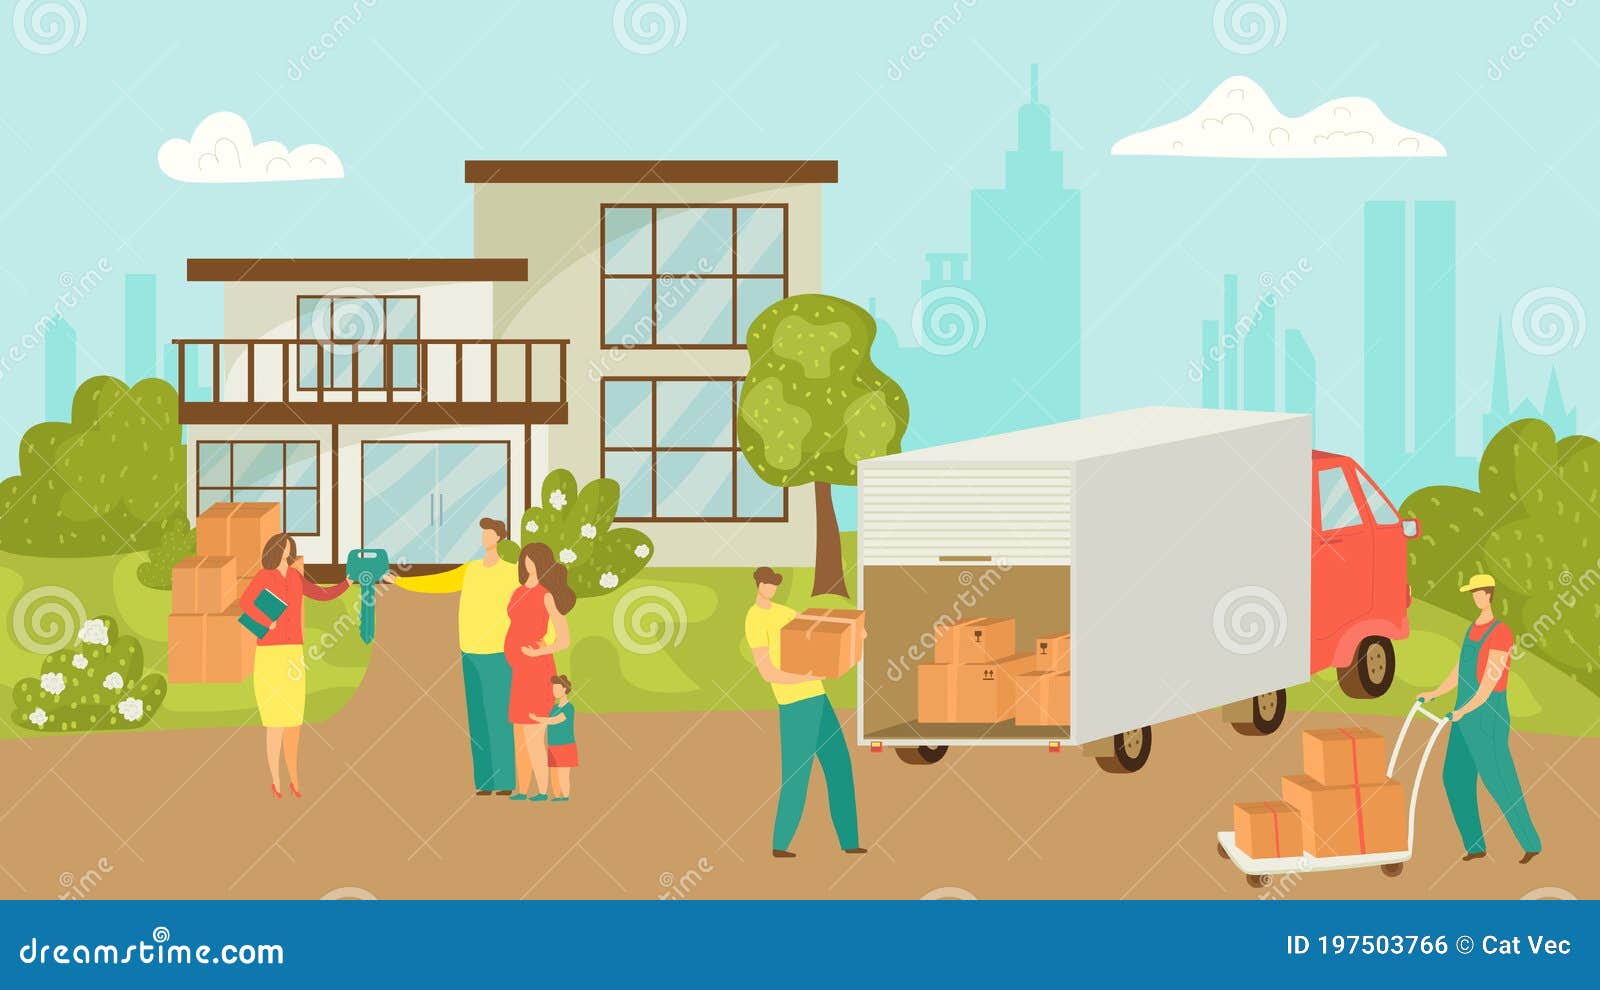 https://thumbs.dreamstime.com/z/people-moving-house-vector-illustration-happy-family-taking-boxes-truck-new-home-relocation-move-movement-service-real-197503766.jpg